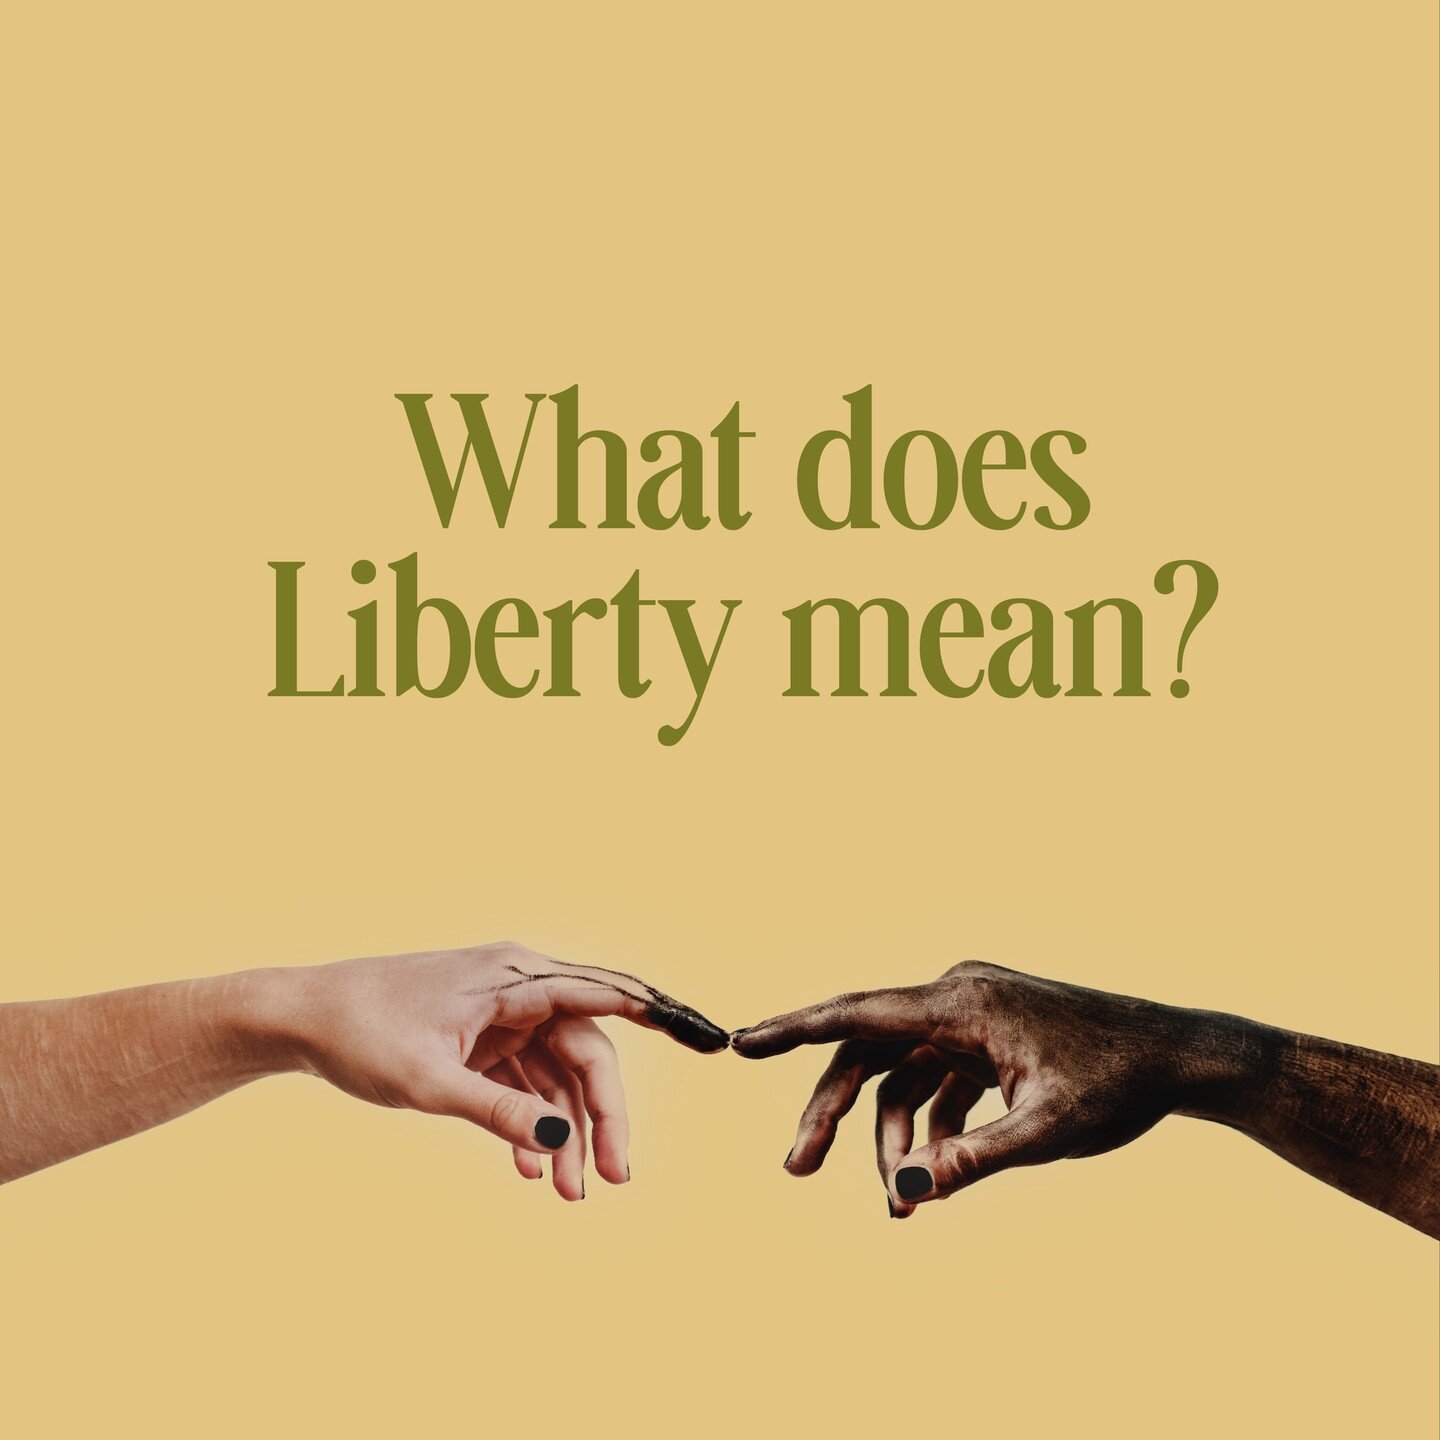 What does Liberty mean? Here are some responses from the Verse Community. Which response resonates most with you? What does Liberty mean to you?